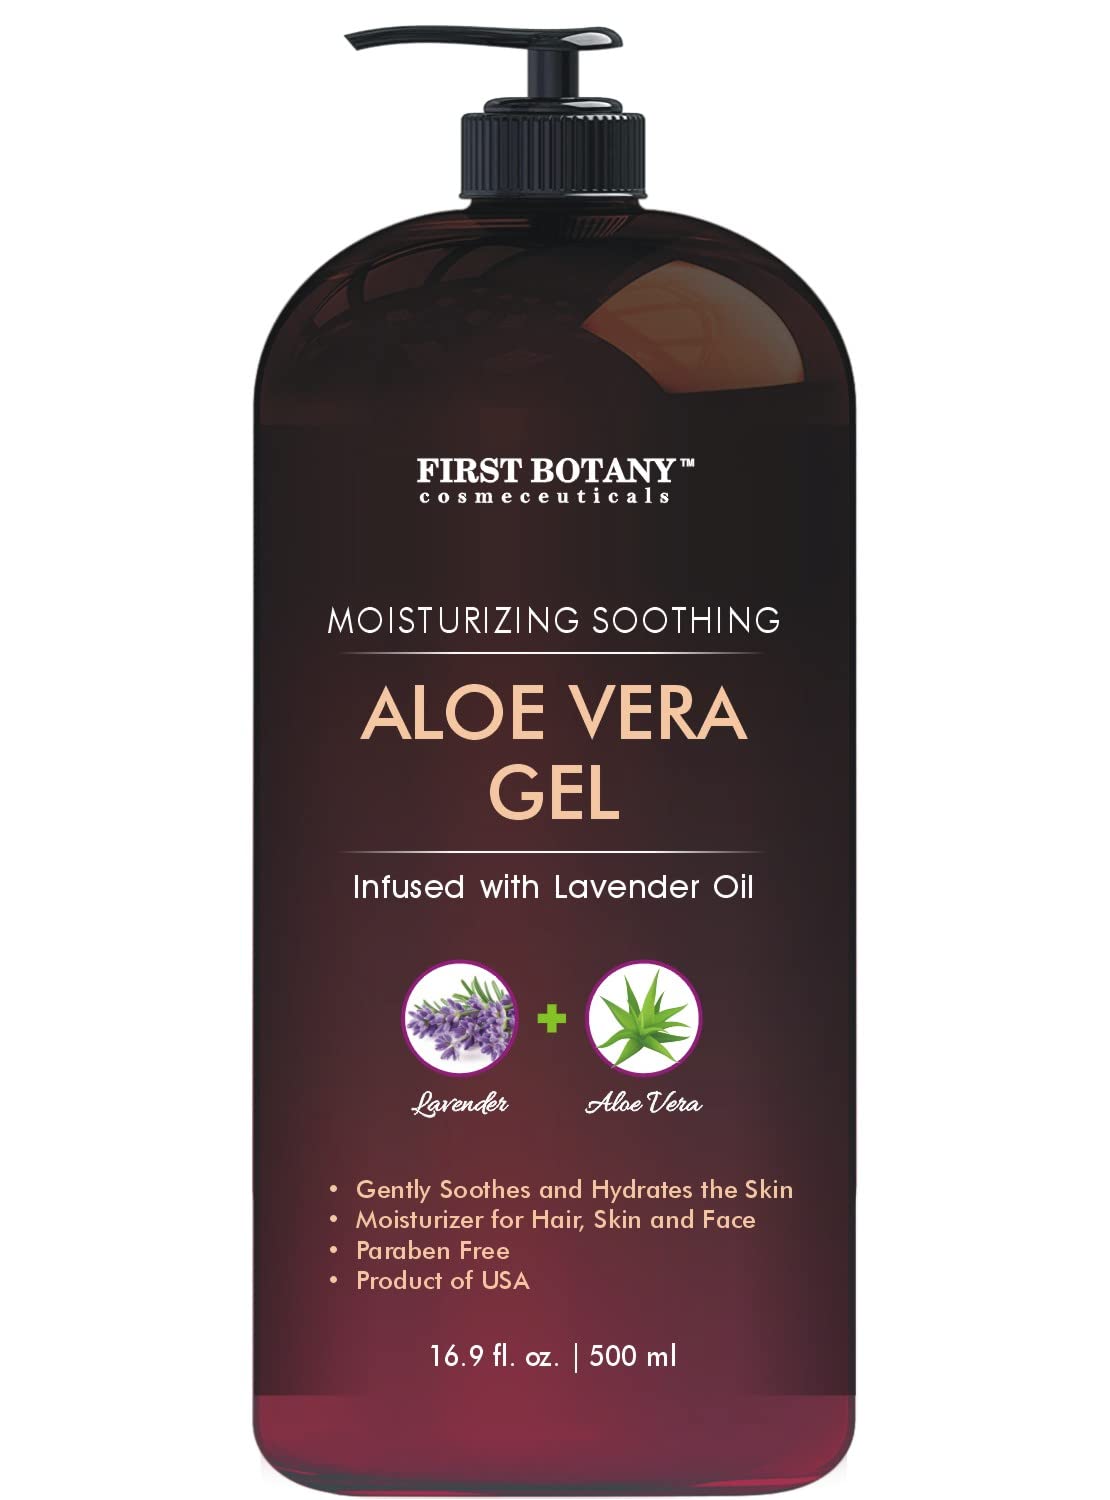 Pure Aloe vera gel - with 100% Fresh & Pure Aloe Infused with Lavender Oil - Natural Raw Moisturizer for Face, Skin, Body, Hair. Perfect for Sunburn, Acne, Razor Bumps 16.9 fl oz